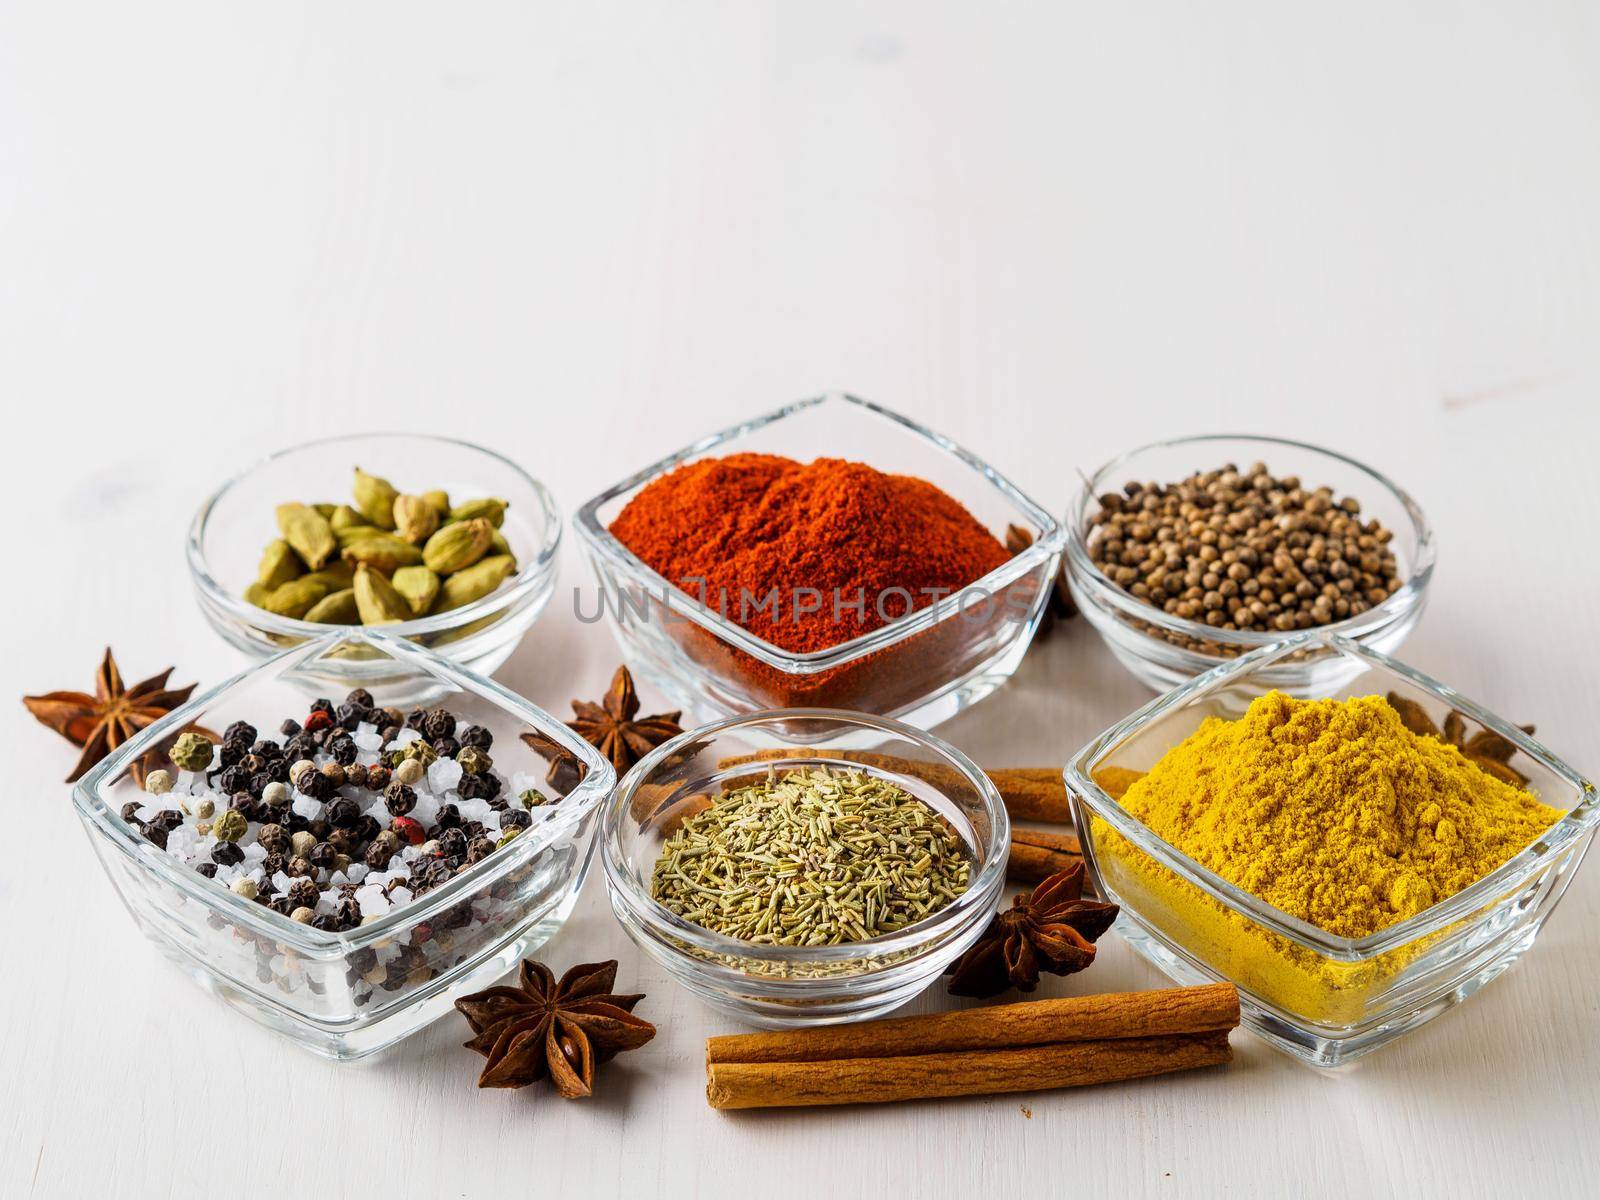 spice set-coriander, red pepper, turmeric, cinnamon, star anise, rosemary various seasonings in glass cups, on white wooden table, side view, blank space for text. by NataBene